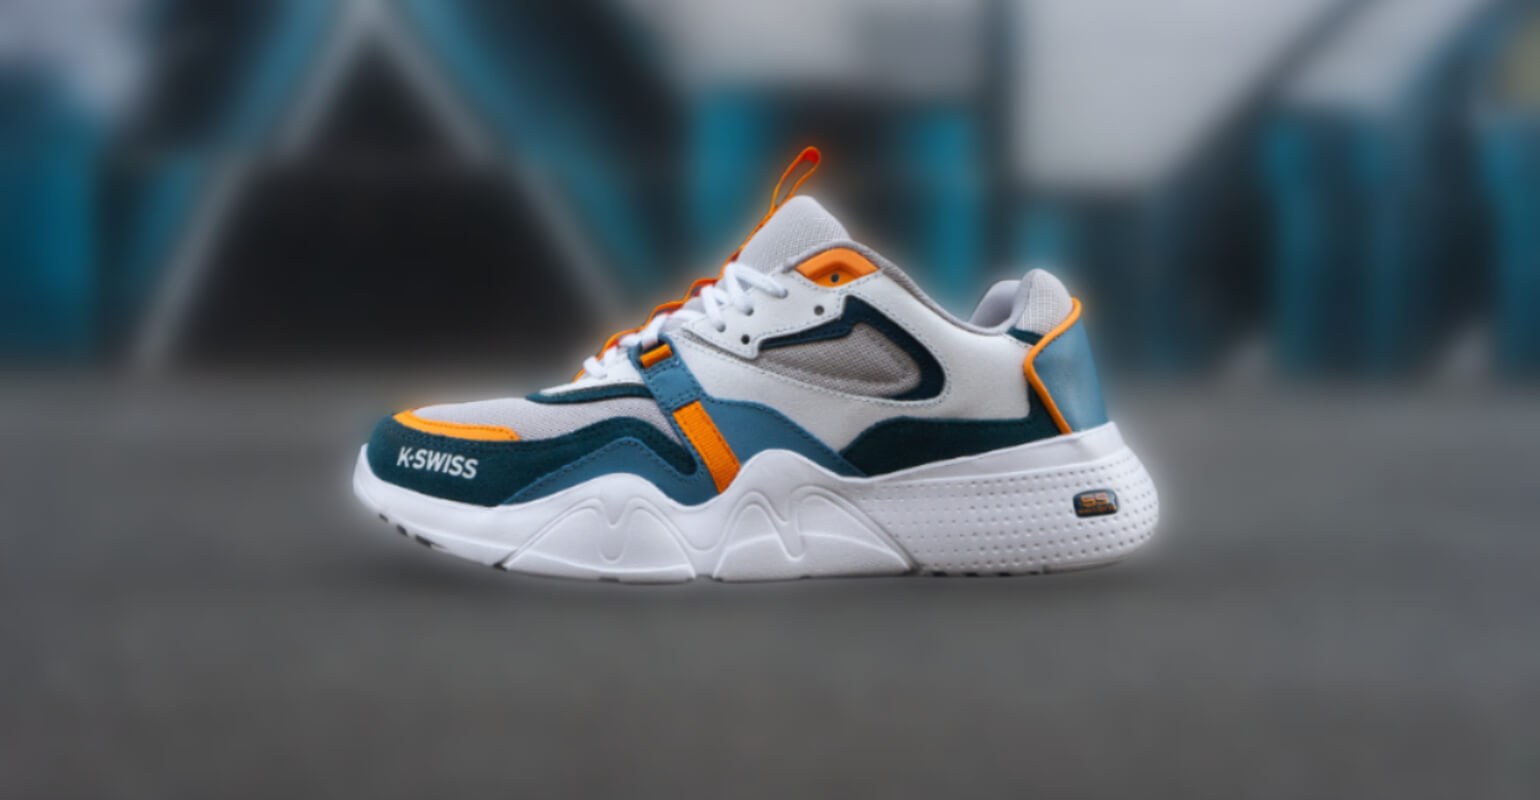 Sneaker photo for e commerce with blurred background